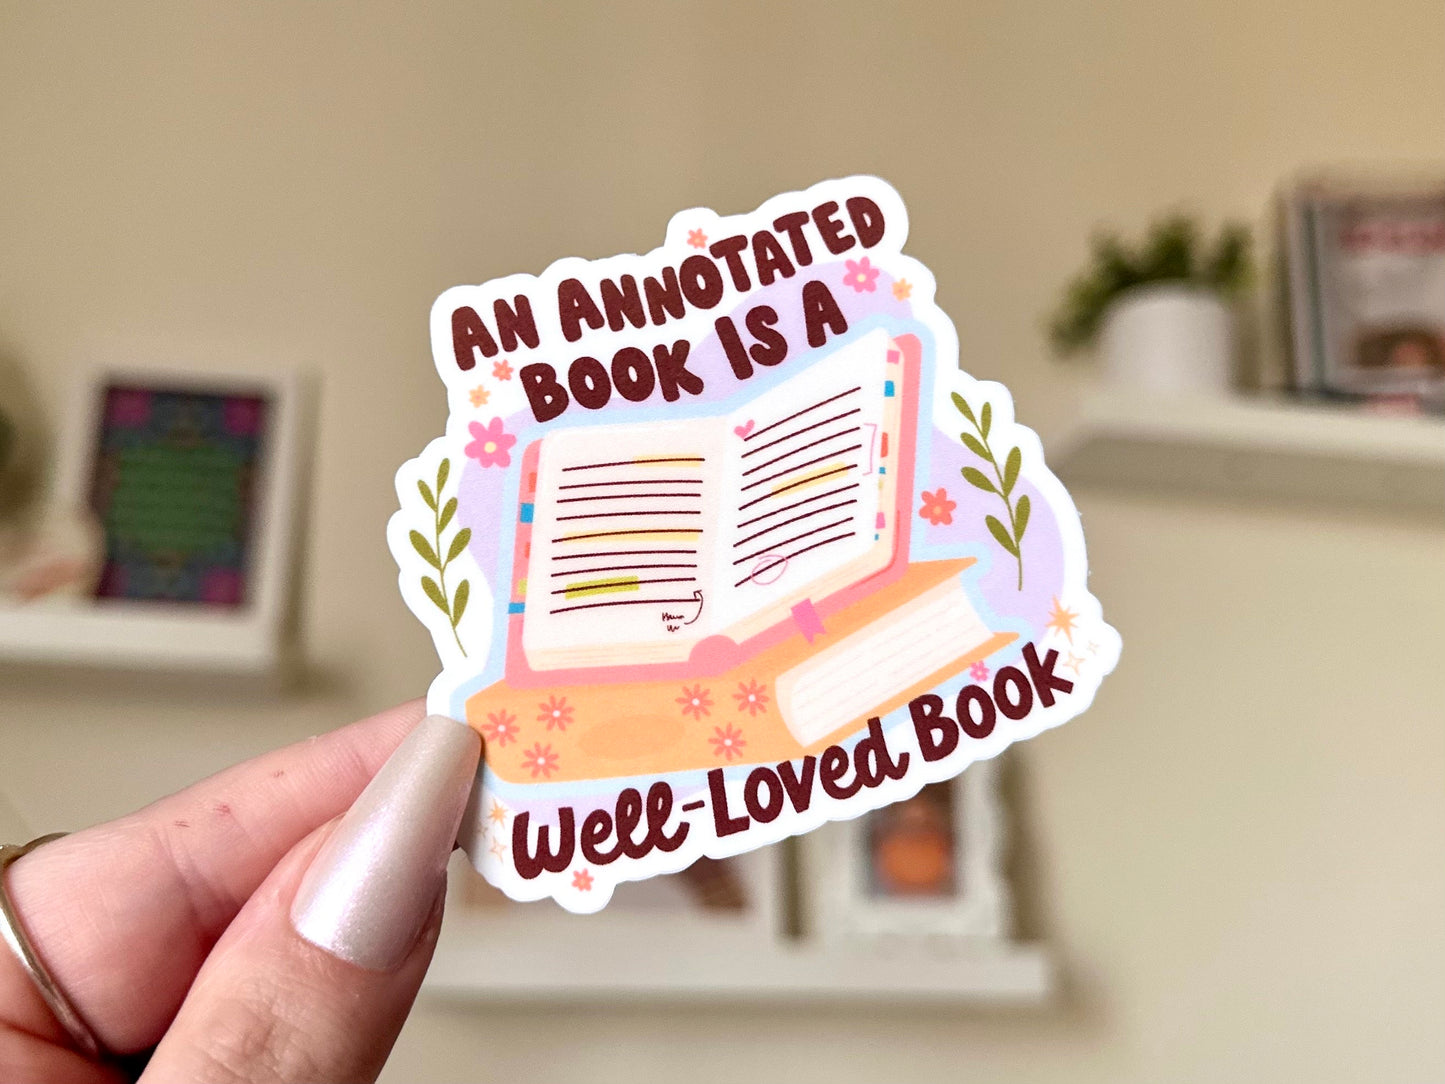 An Annotated Book is a Well Loved Book Waterproof Sticker, Book Stickers, Gifts for Readers, Bookish, Book Lover Decal, BookTok, Book Club